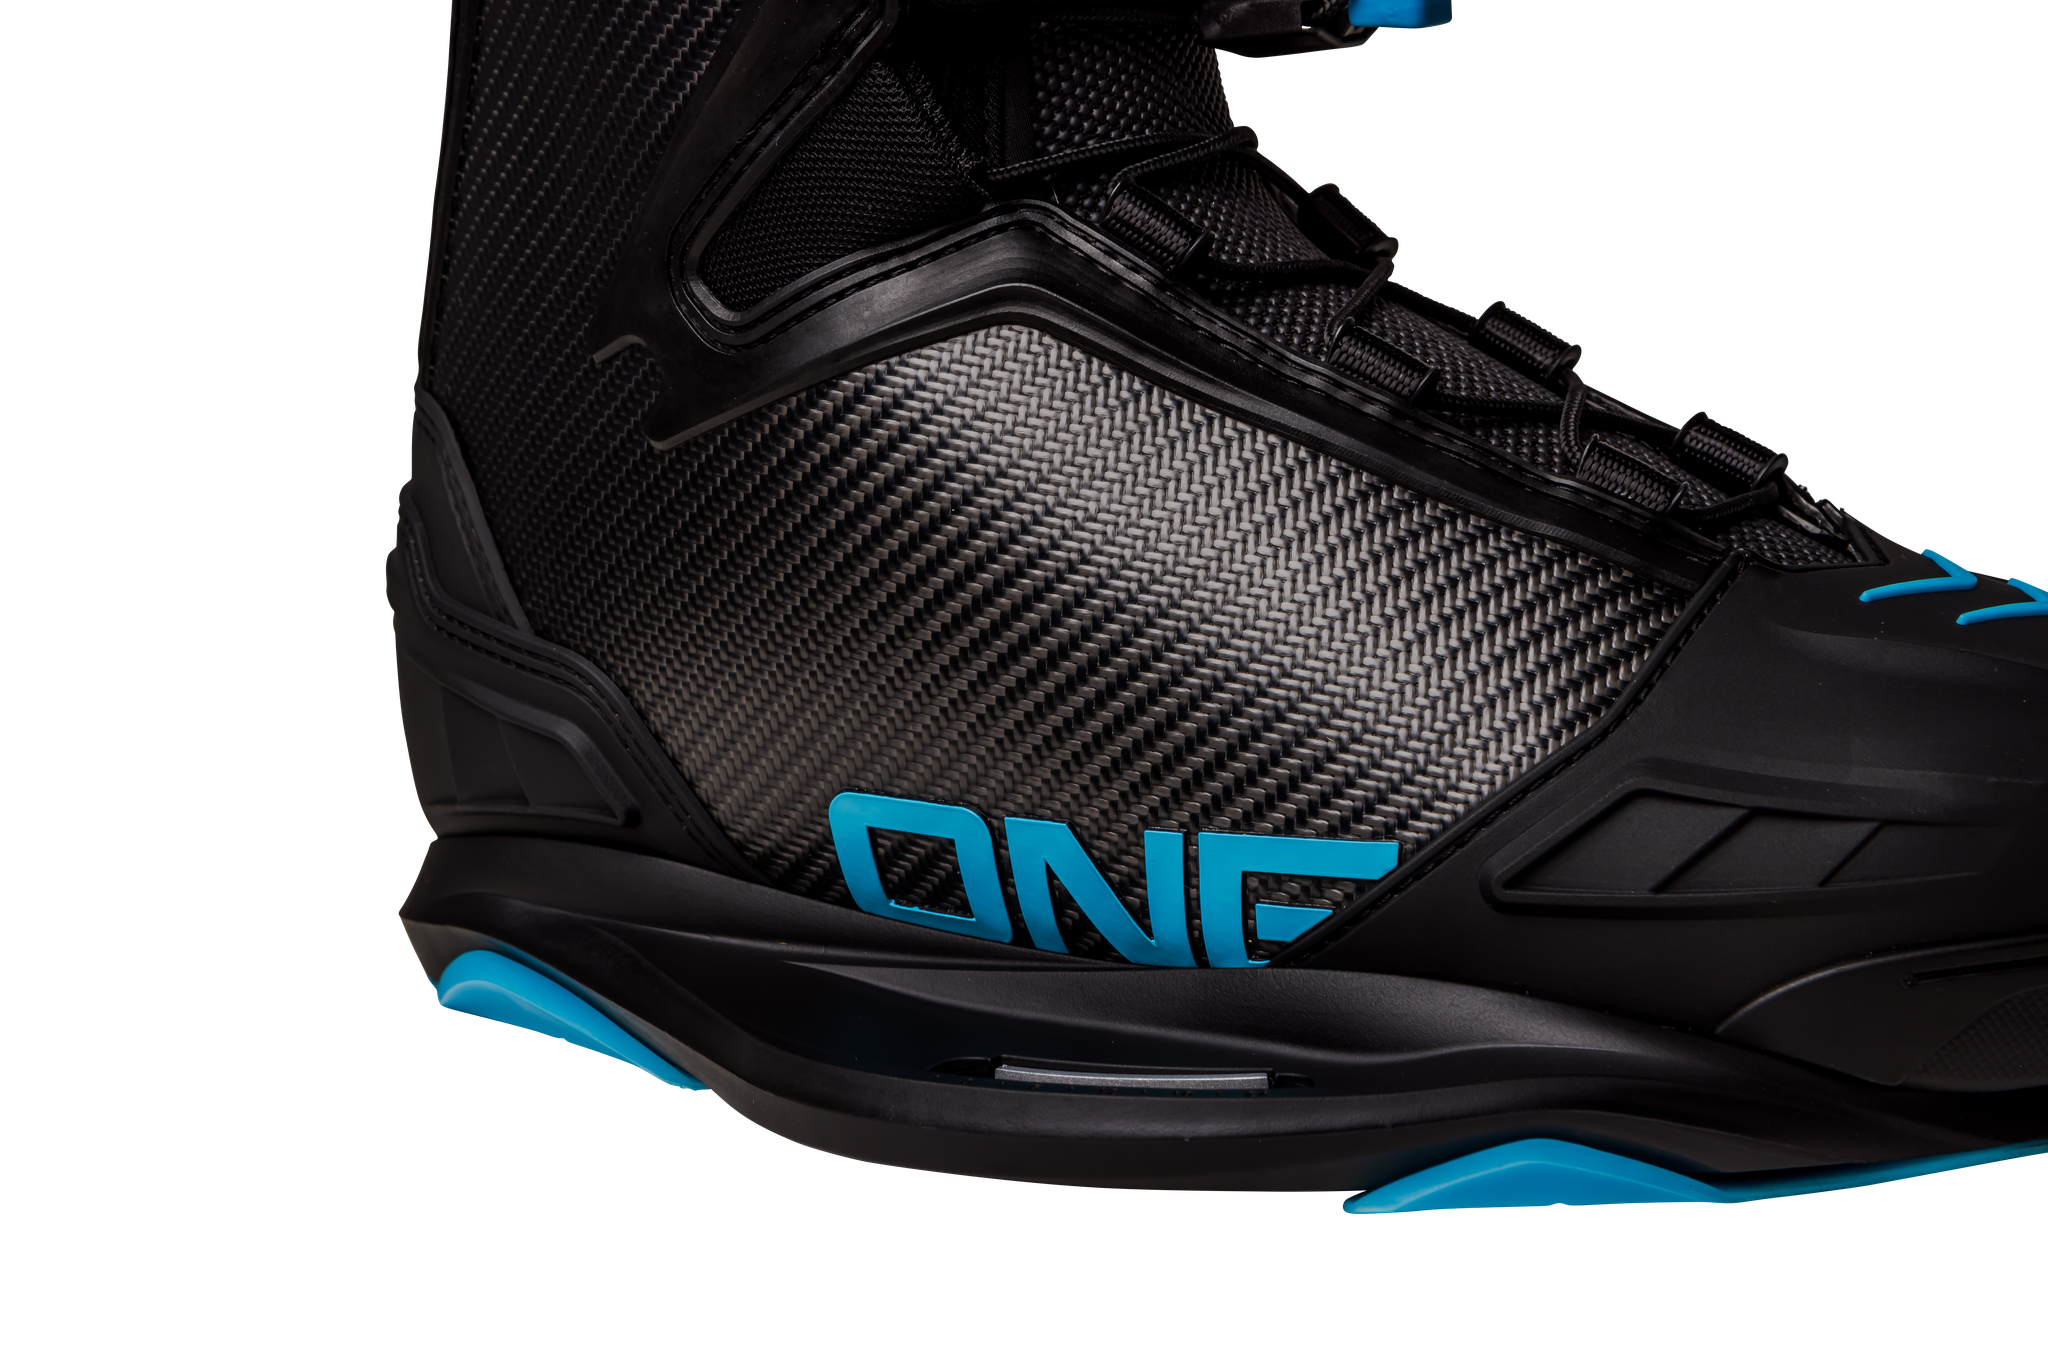 A pair of Ronix 2023 One Carbitex Boots with an Intuition+ heat moldable liner on a black background.